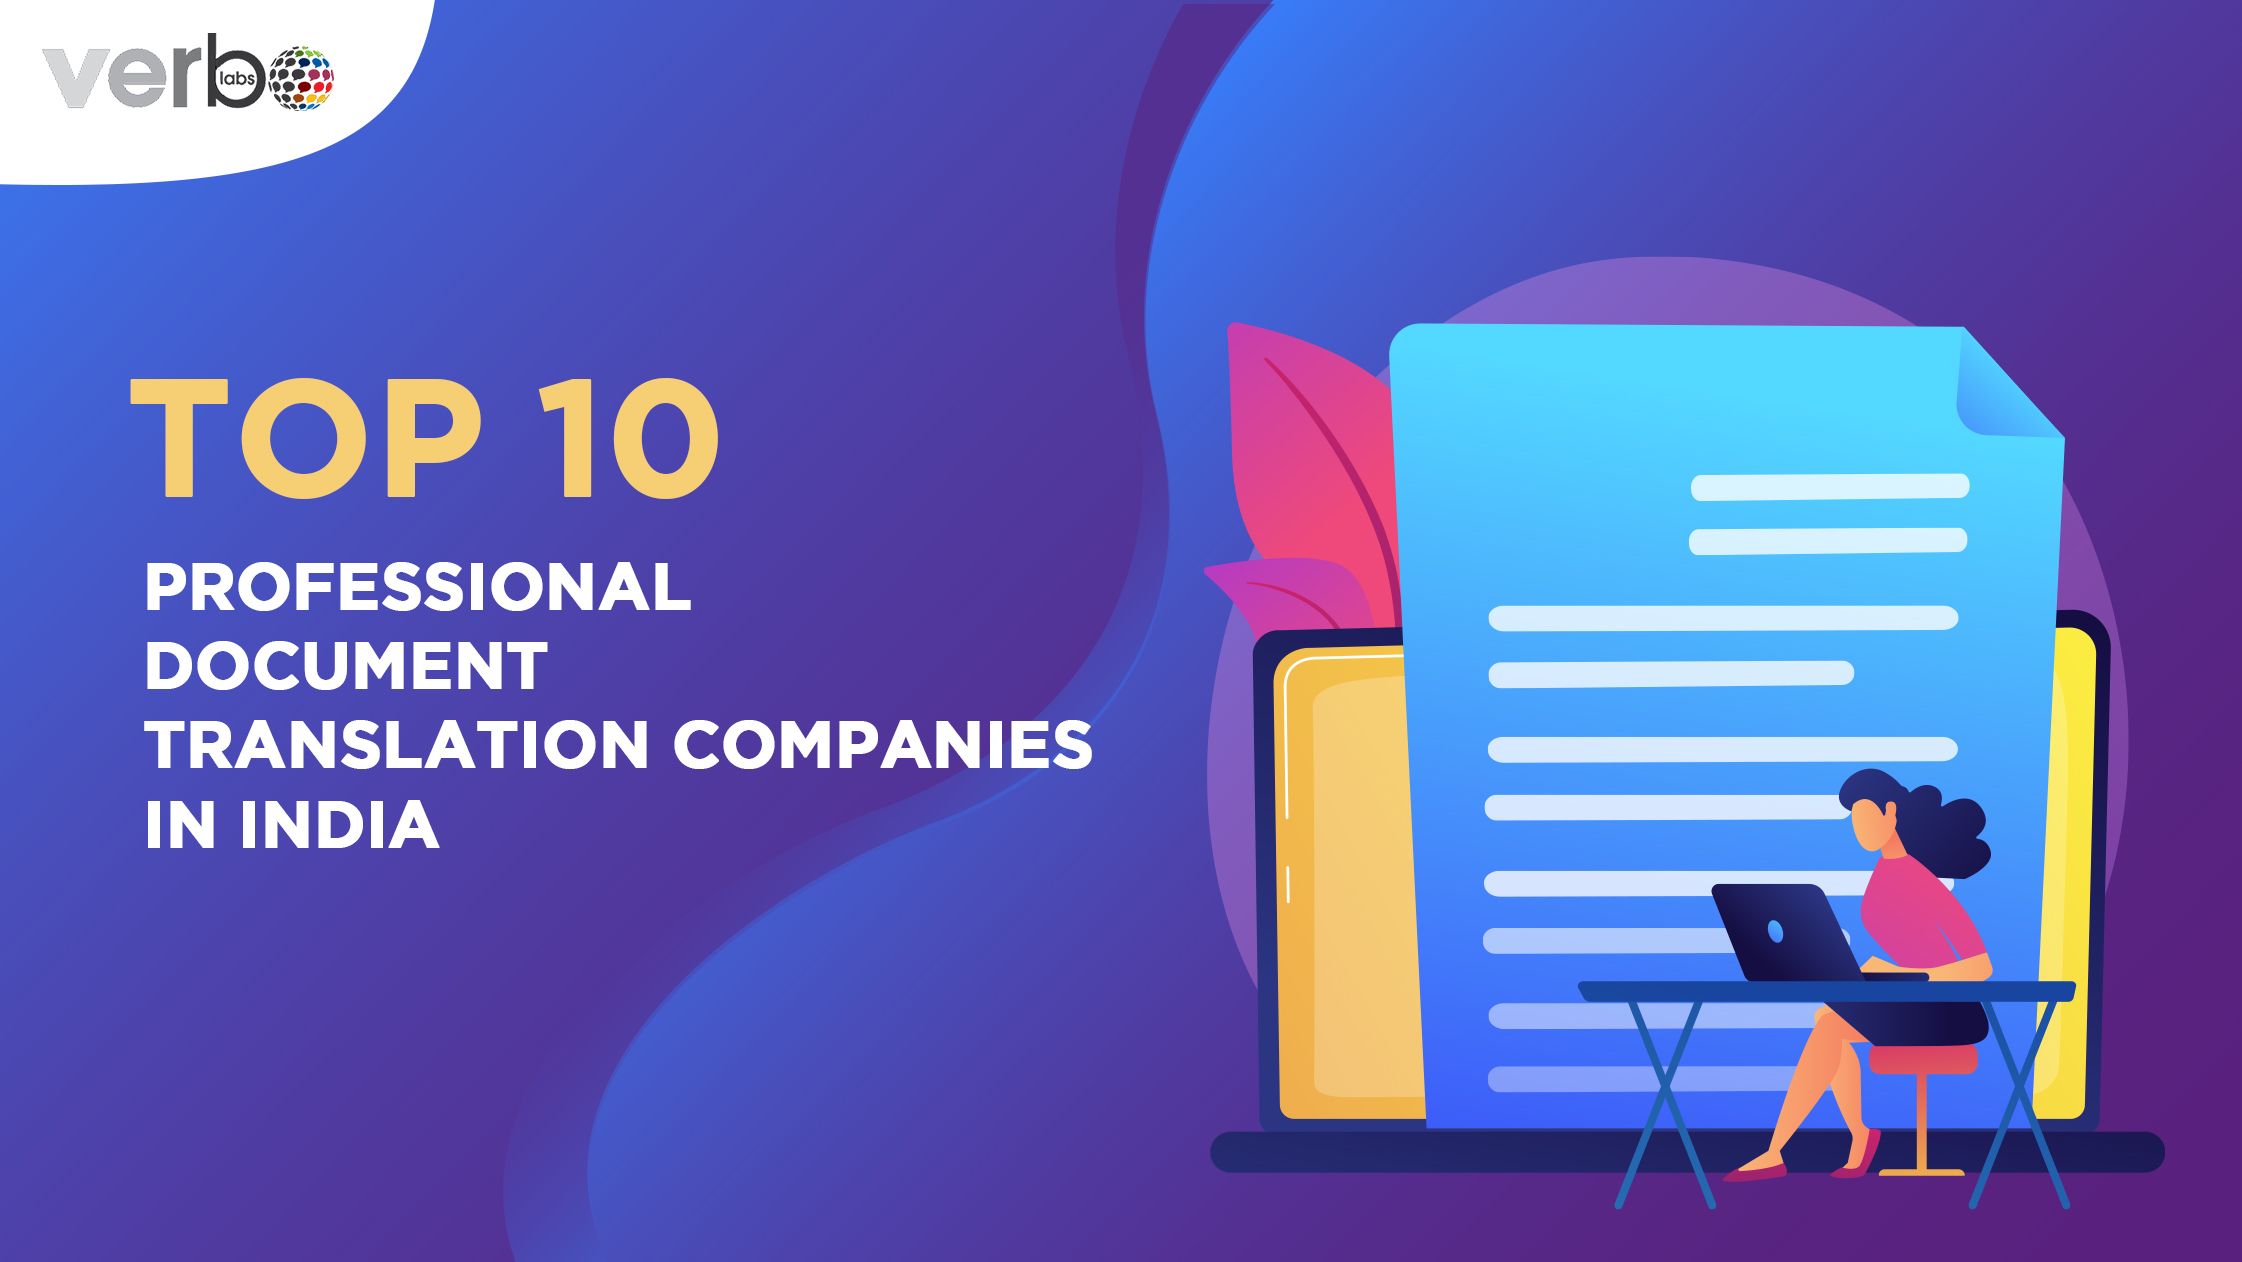 Top 10 Professional Document Translation Companies in India